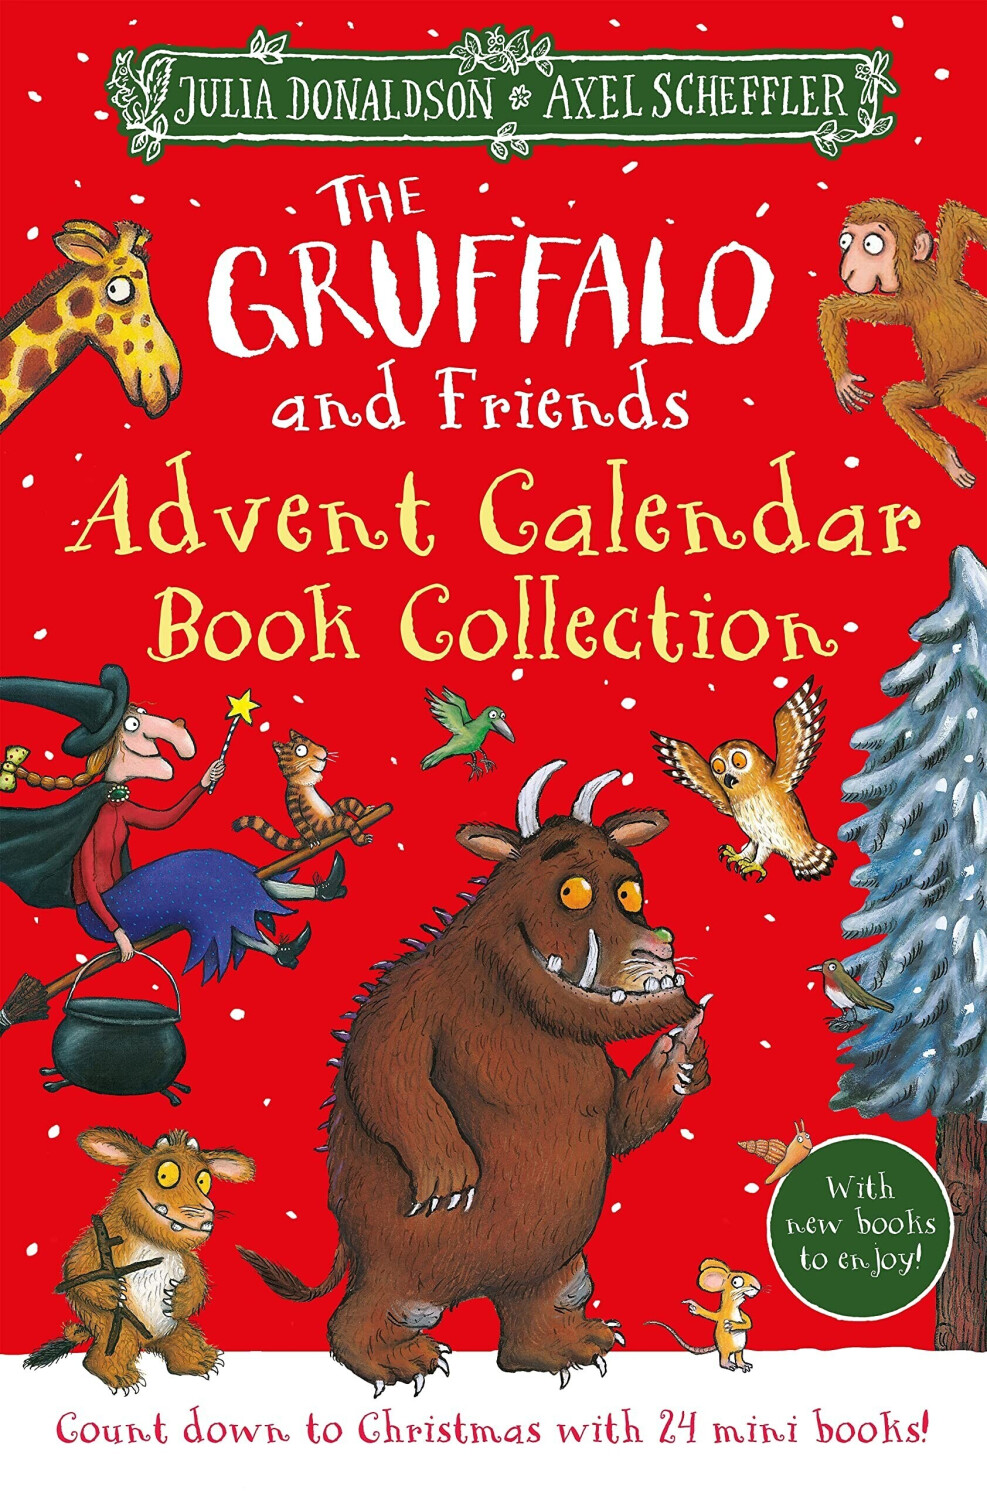 Buy The Gruffalo and Friends Advent Calendar Book Collection from £7.00